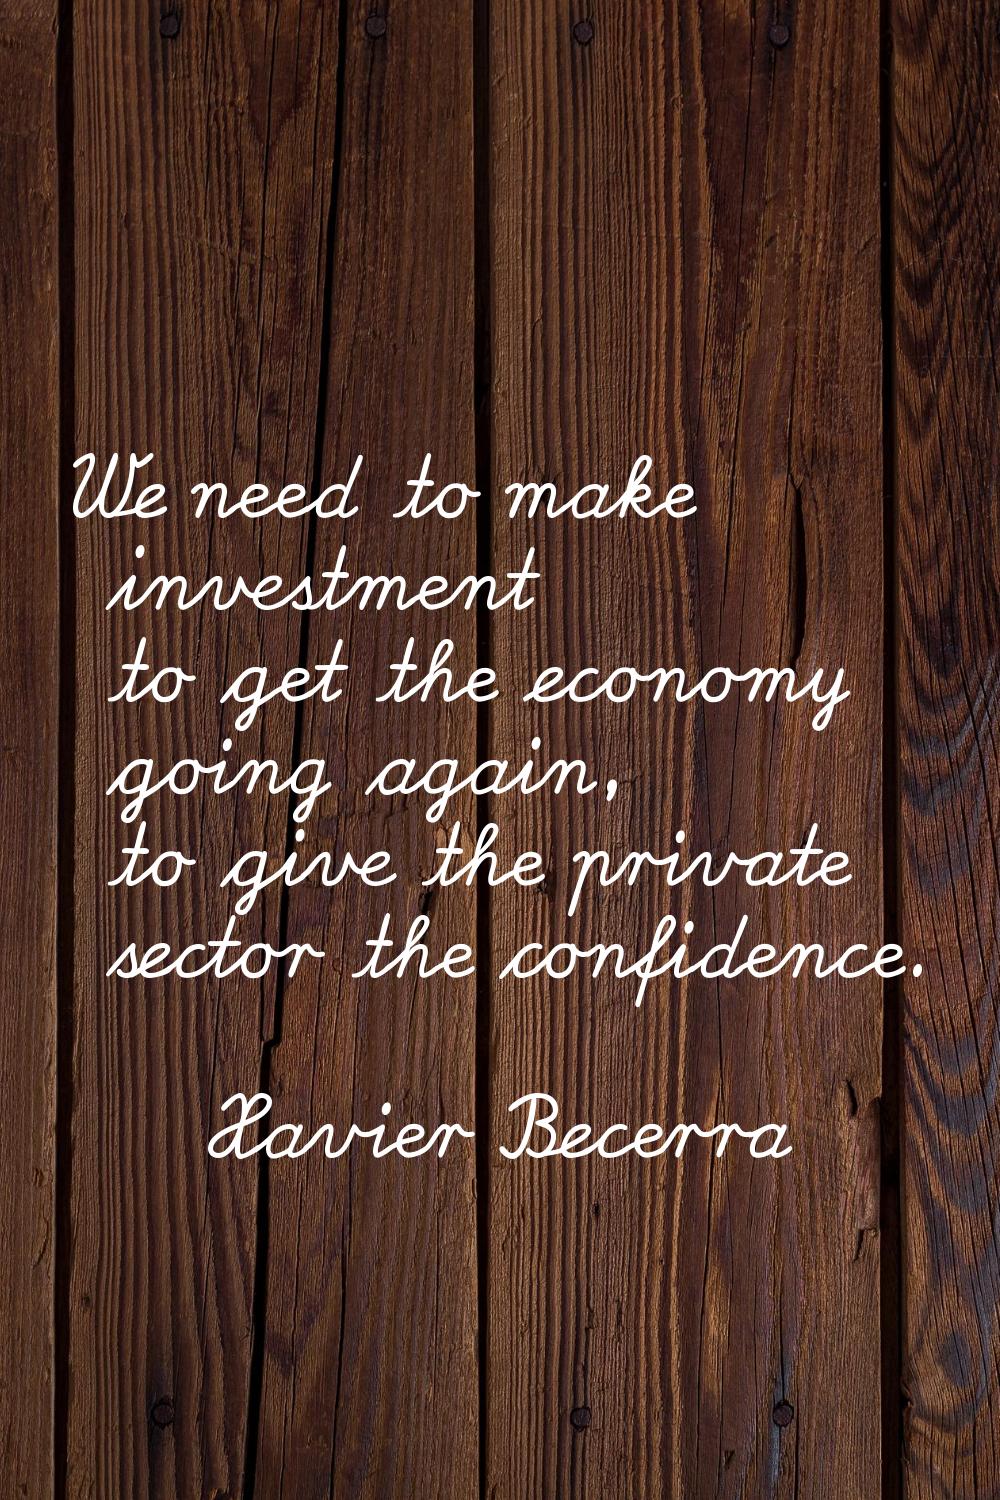 We need to make investment to get the economy going again, to give the private sector the confidenc